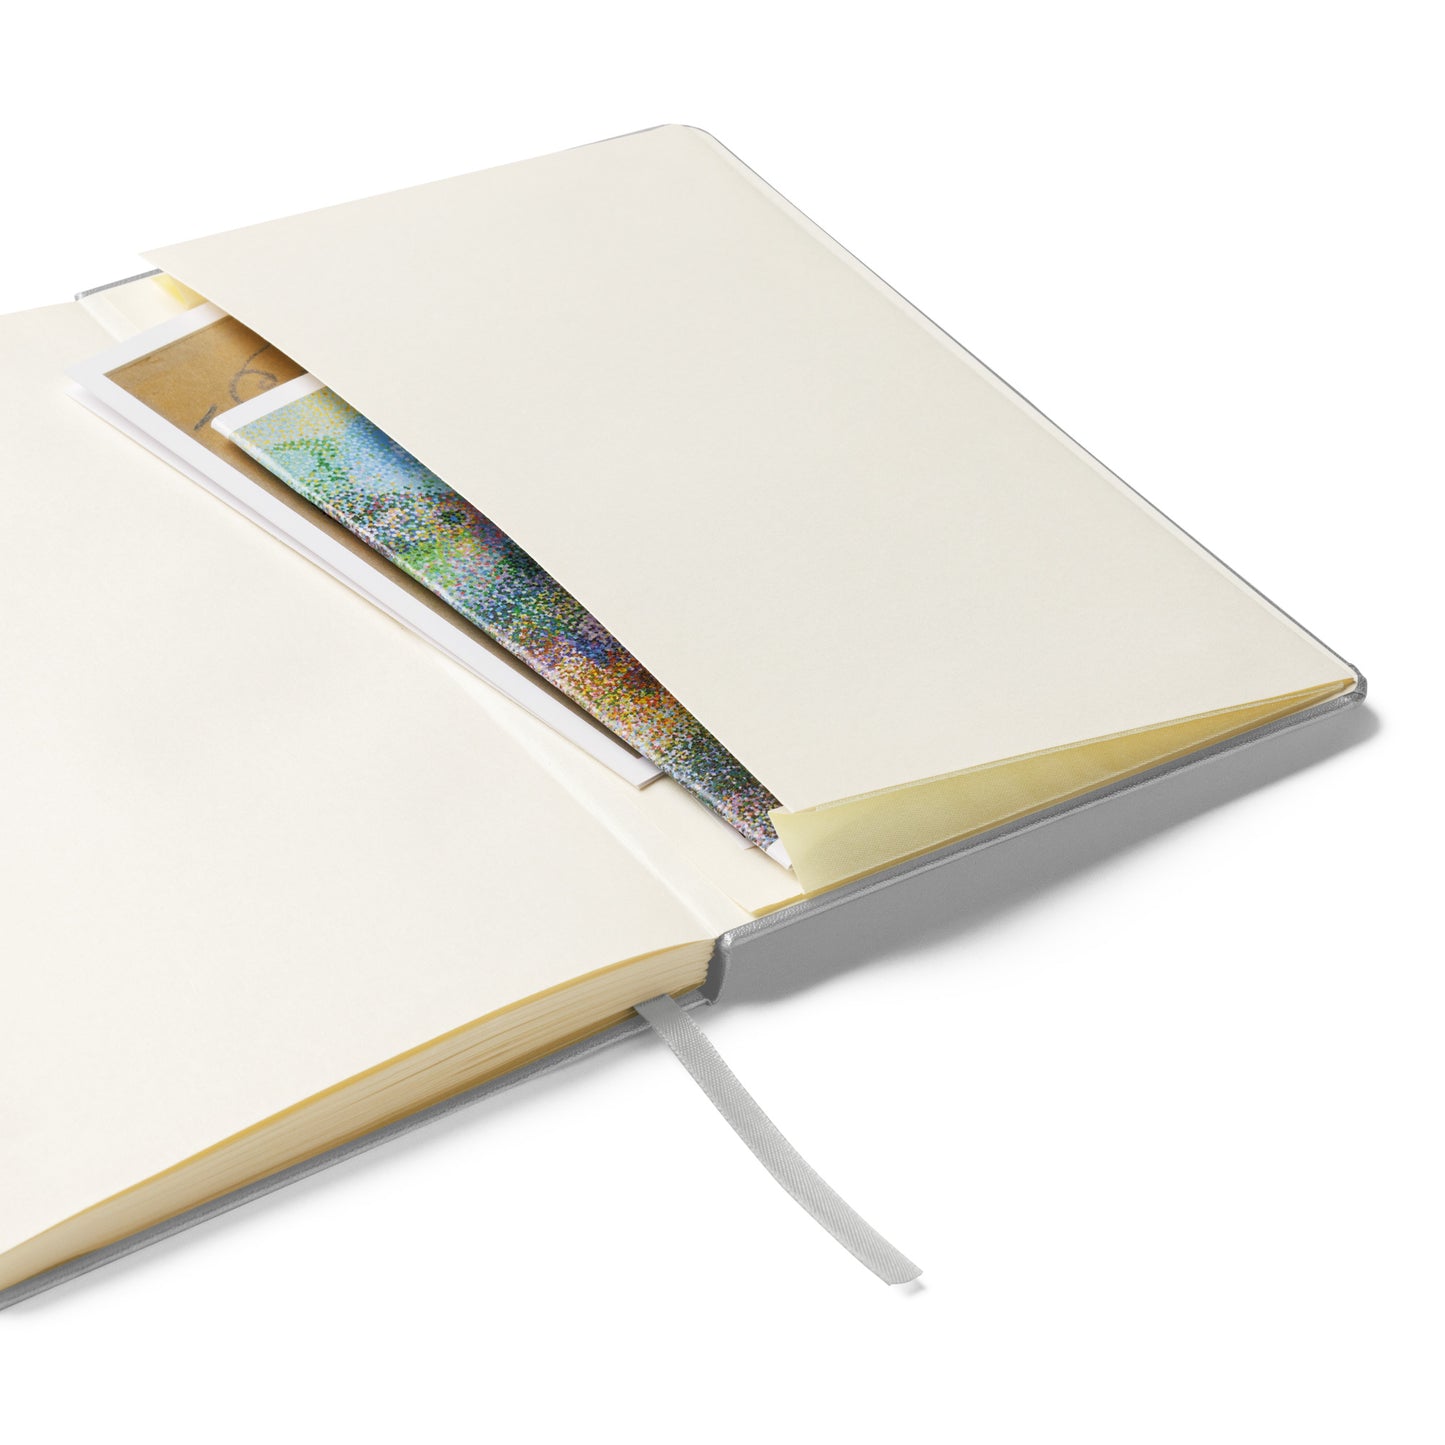 I am capable of creating life that I dream off | Hardcover Notebook